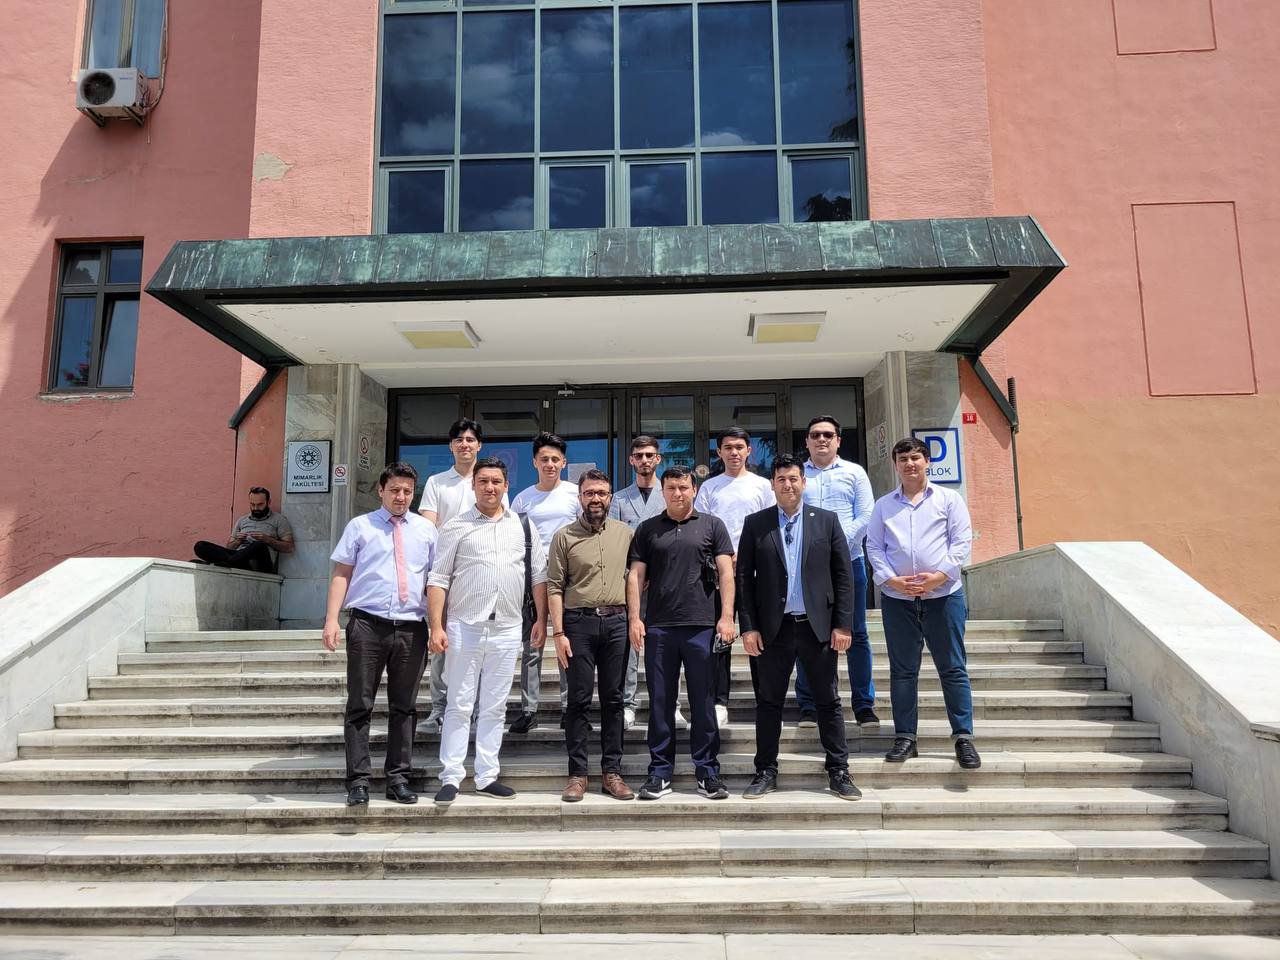 Our students studying at the Yildiz Technical University in Turkey under the 3 + 1 program successfully defended their projects before a special commission